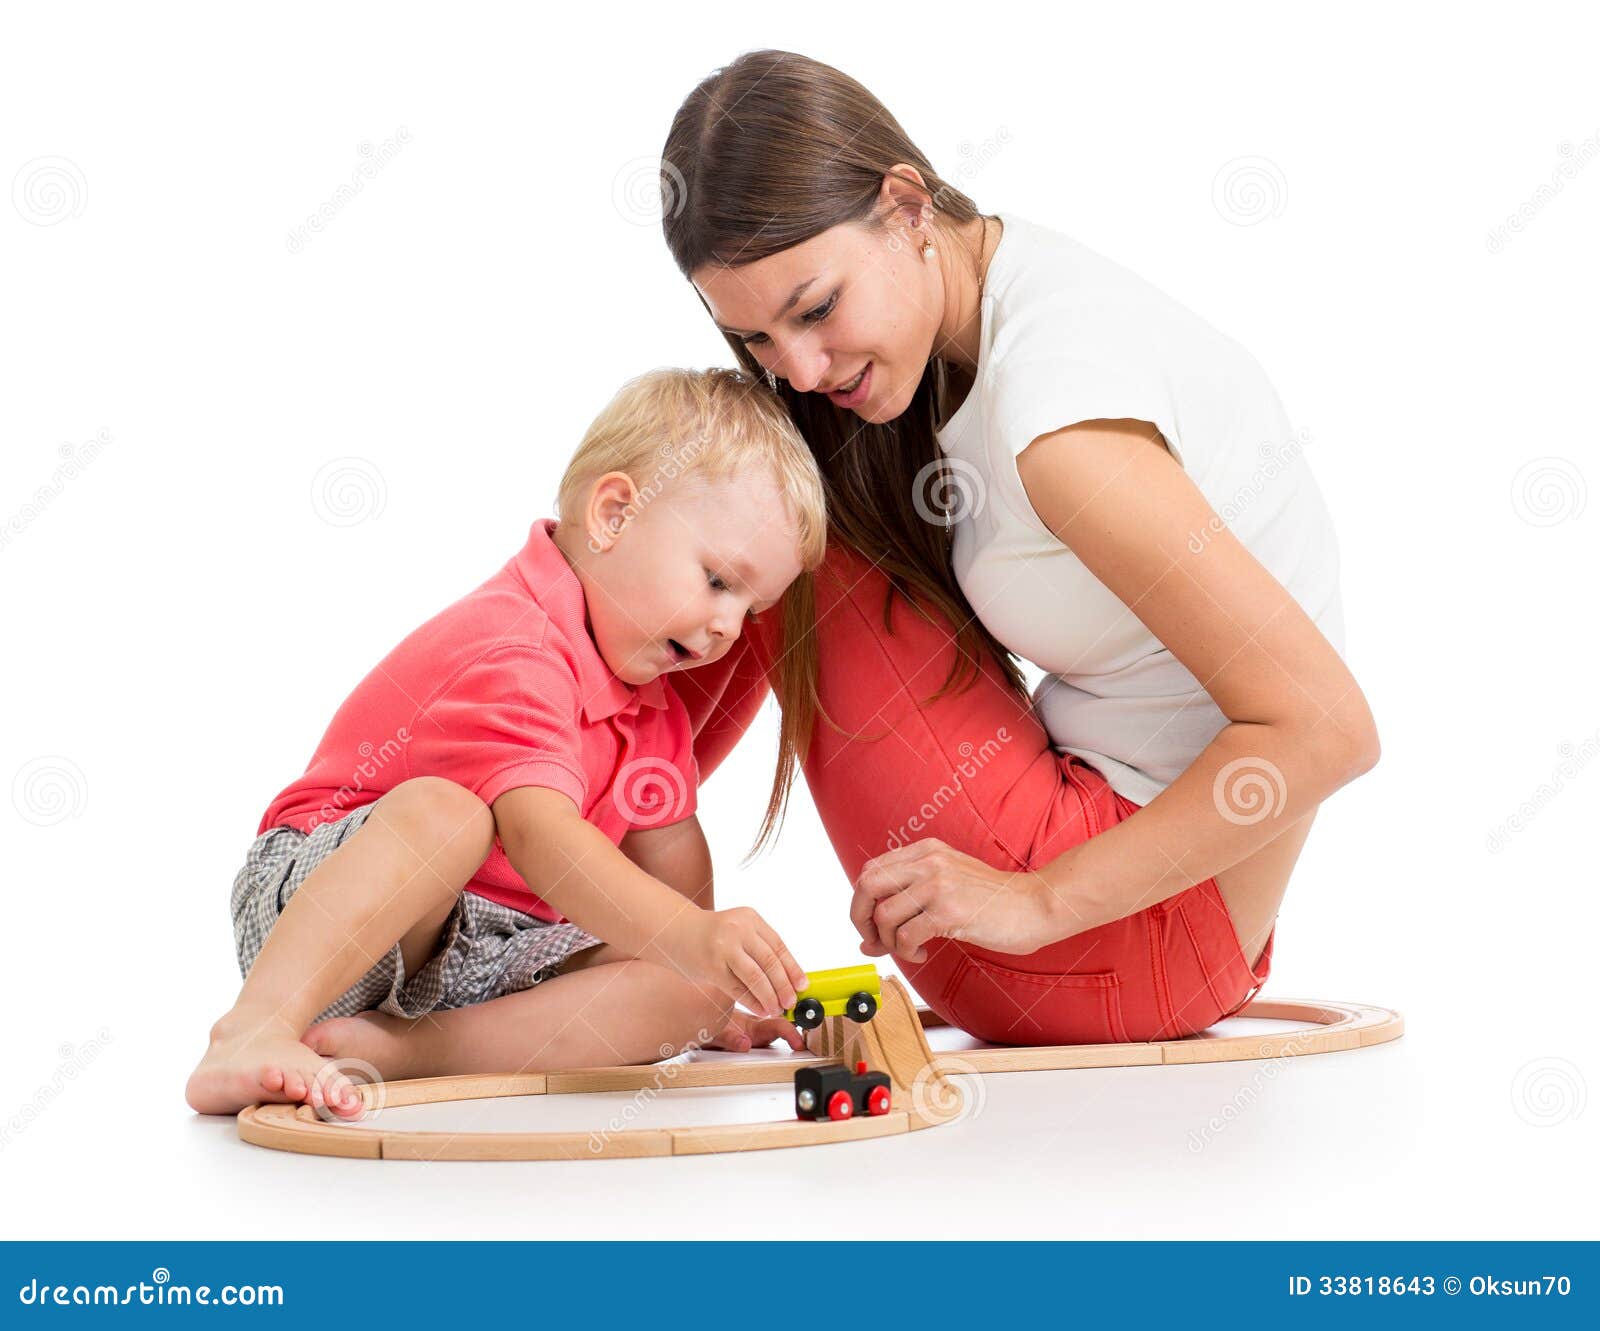 Child Boy And His Mther Play Stock Photos - Image: 33818643